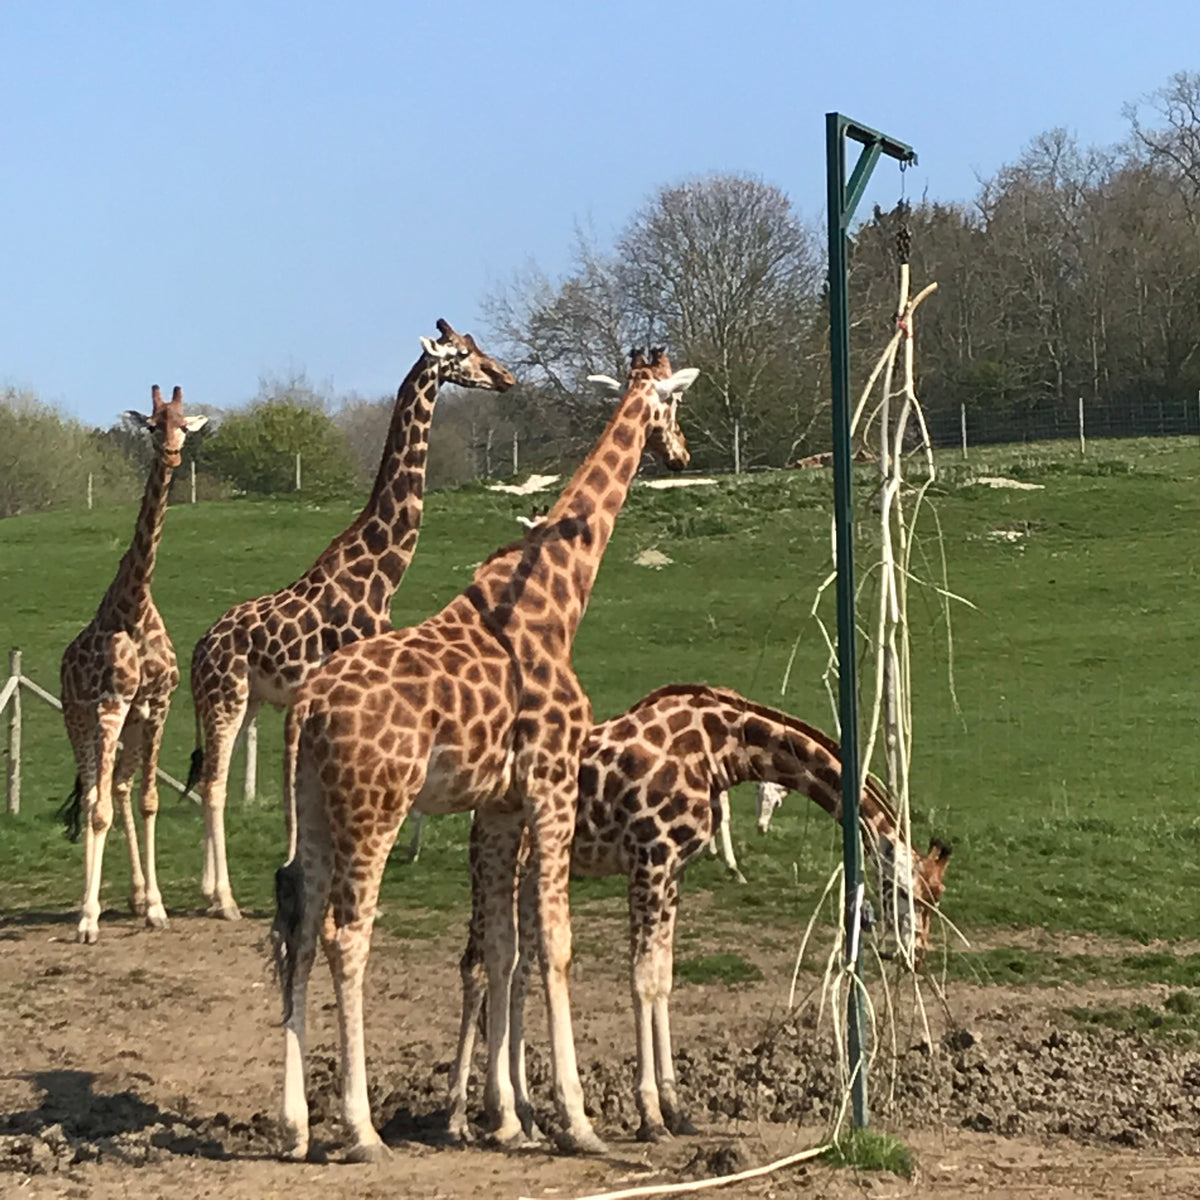 Welcome to our very first ExplorerBlog post! First up is Port Lympne Reserve & Hotel, Kent, UK